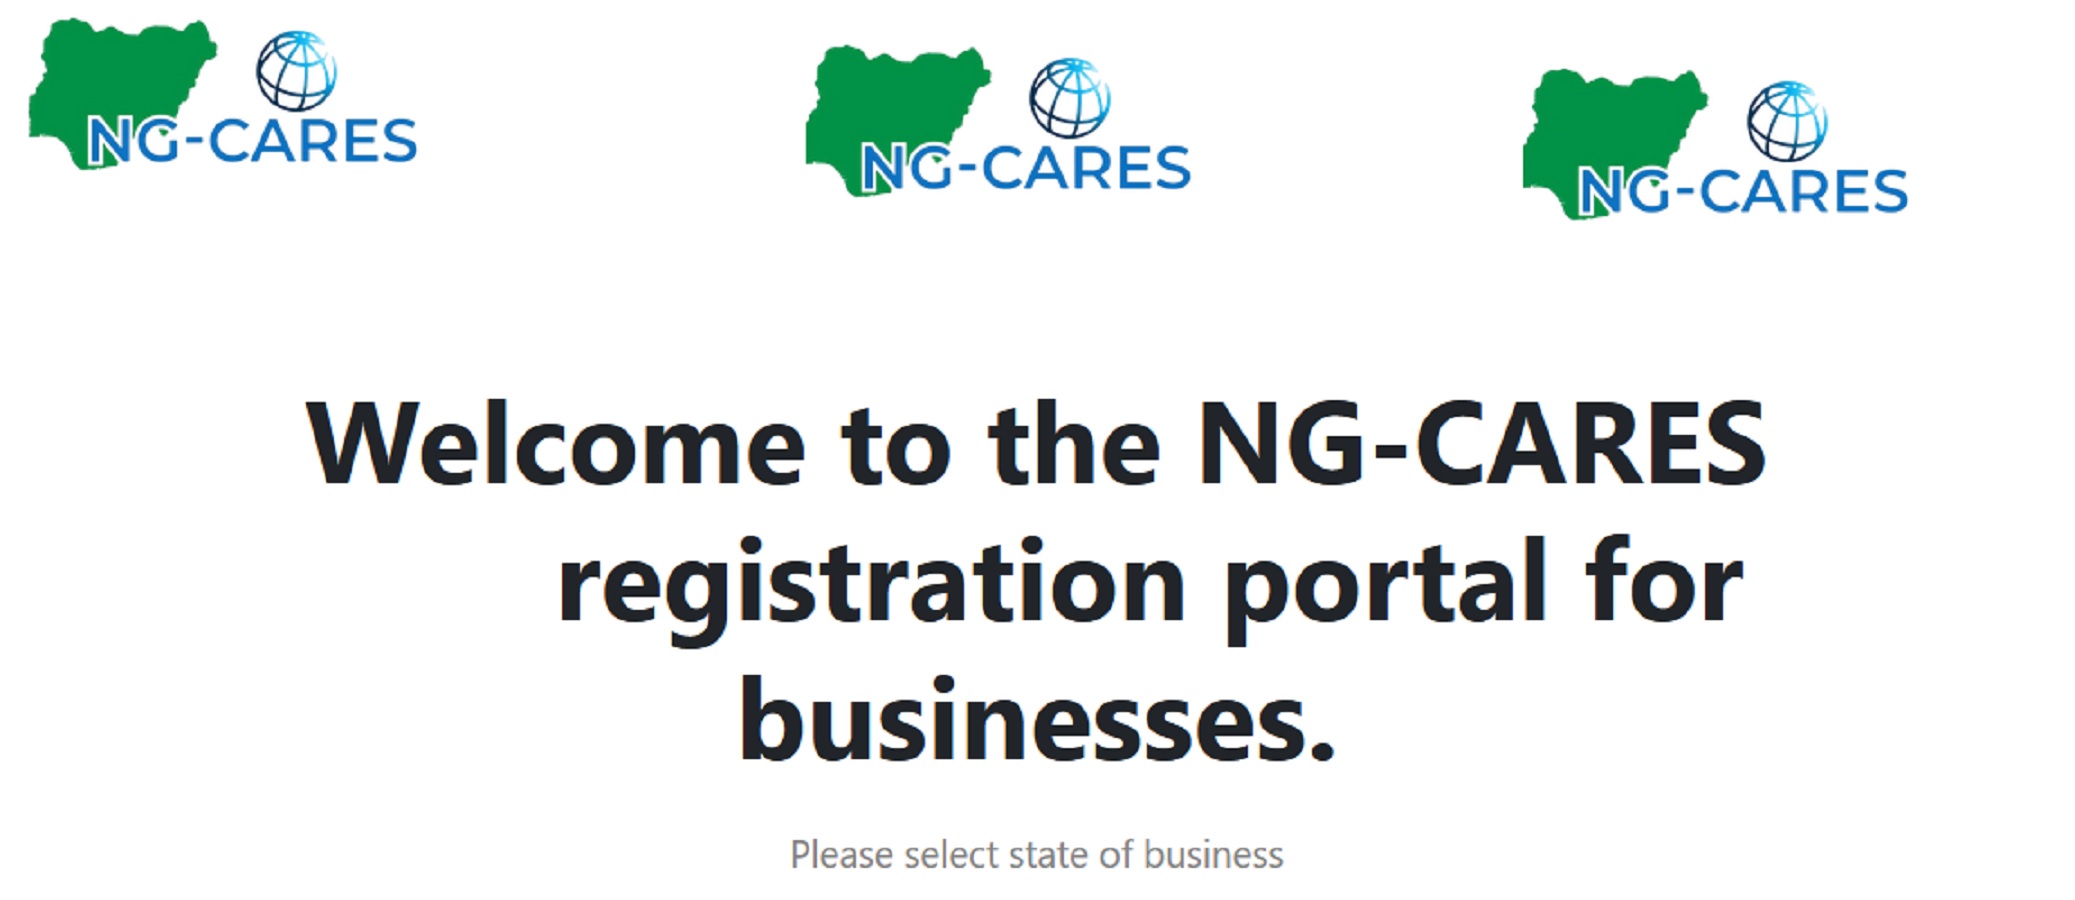 NG Cares Business Loan/Grant Application Portal for all States in